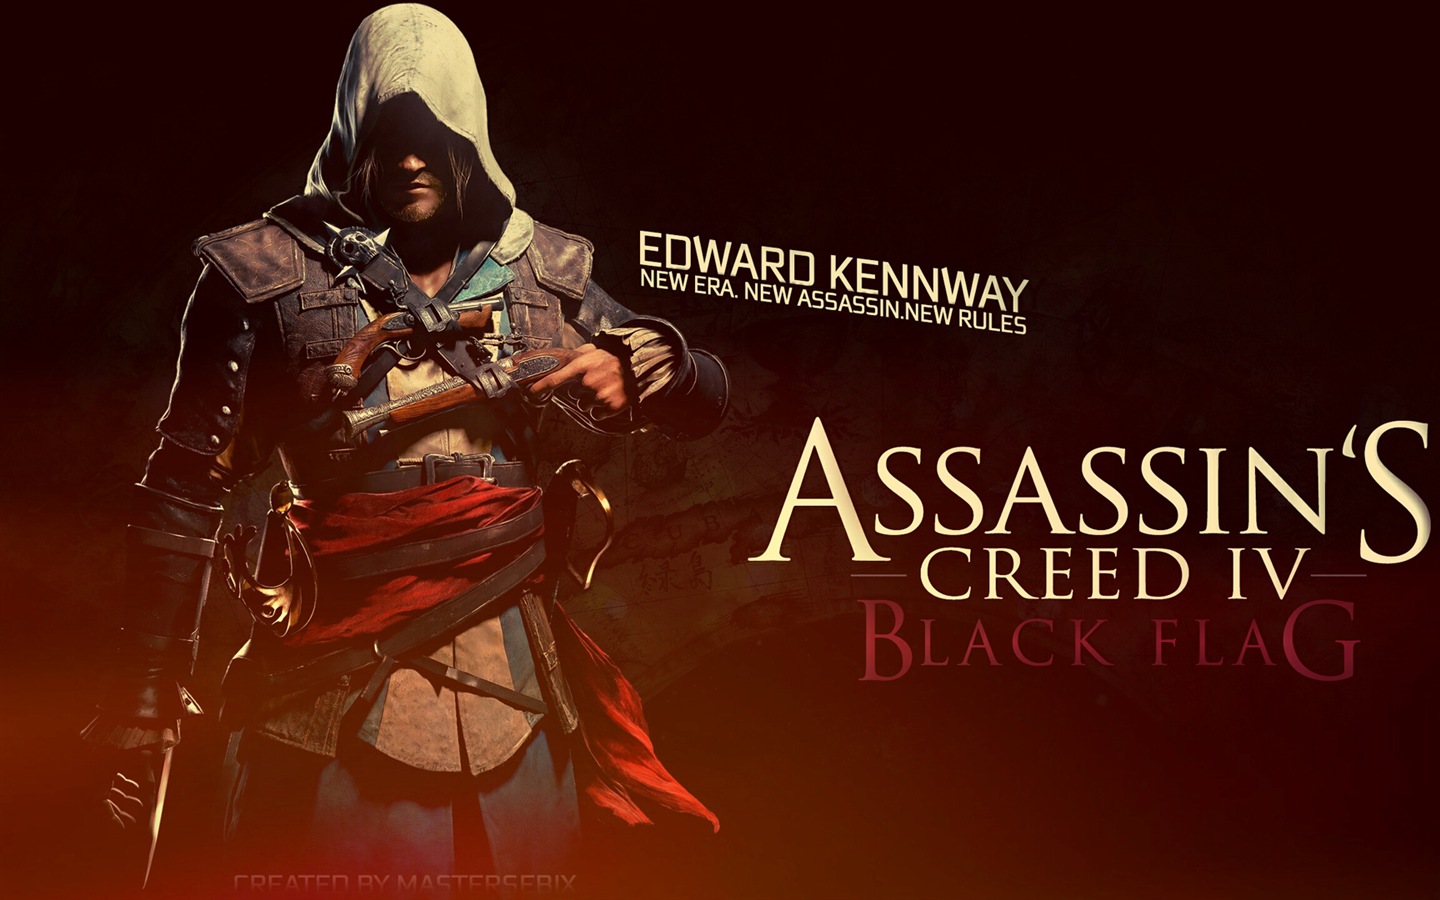 Creed IV Assassin: Black Flag HD wallpapers #17 - 1440x900